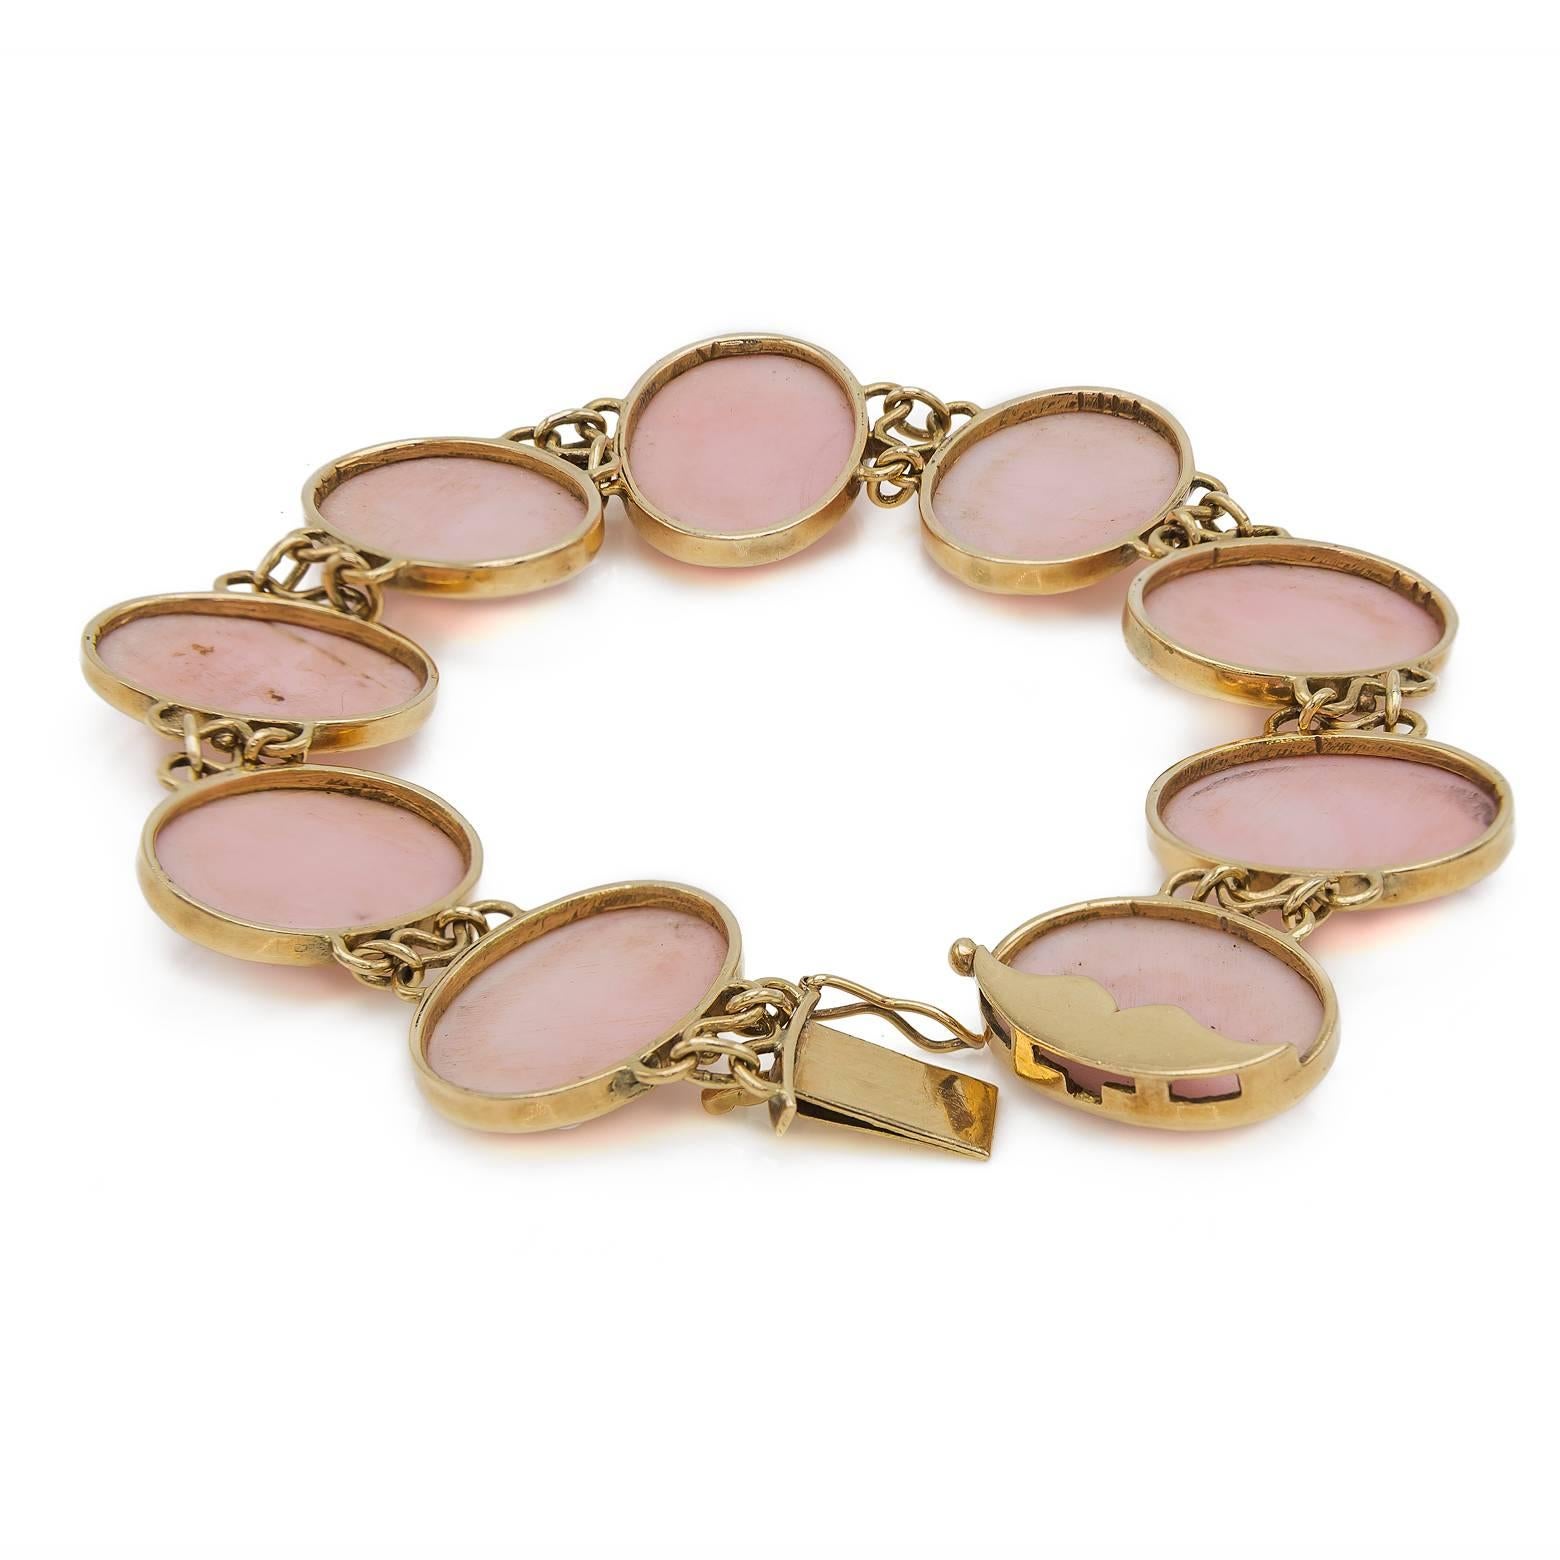 Many different flowers are engraved in this beautiful light pink conch shell reminiscent of the classic 1930's in an Art Nouveau Style. The detail work on this bracelet is gorgeous and the petals, leaves, and stems are precise and delicate. 